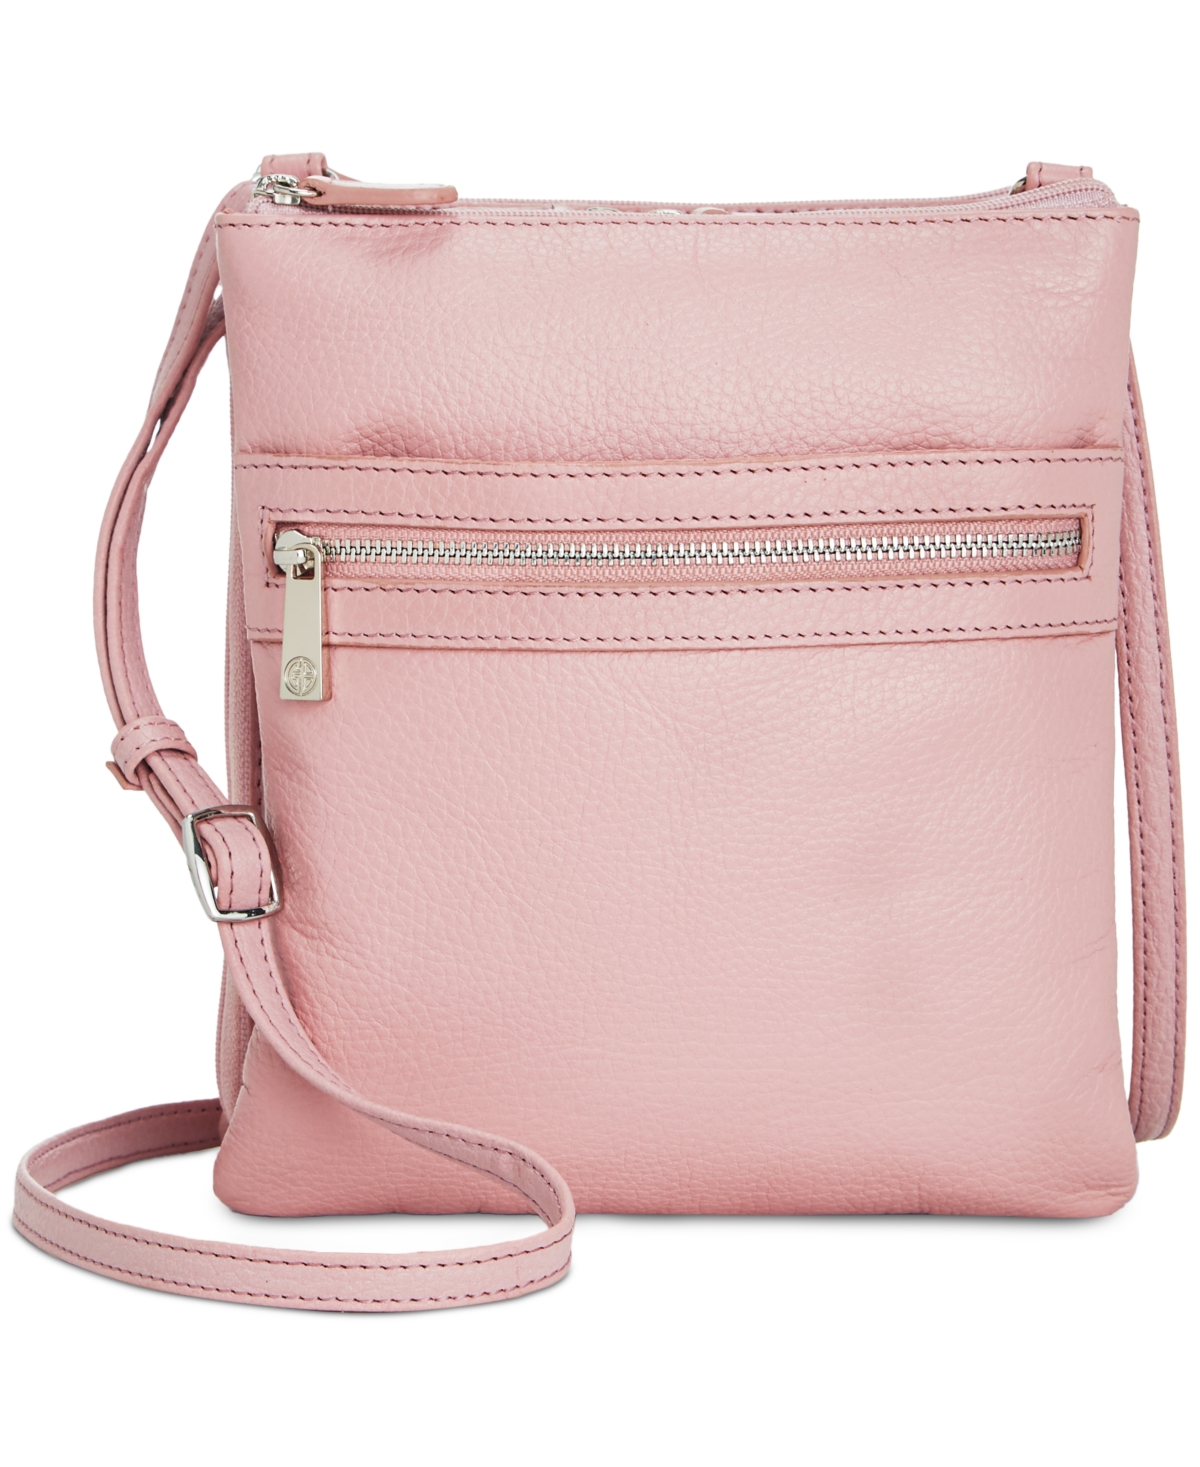 Triple-Zip Pebble Leather Dasher Crossbody, Created for Macy's - Rose